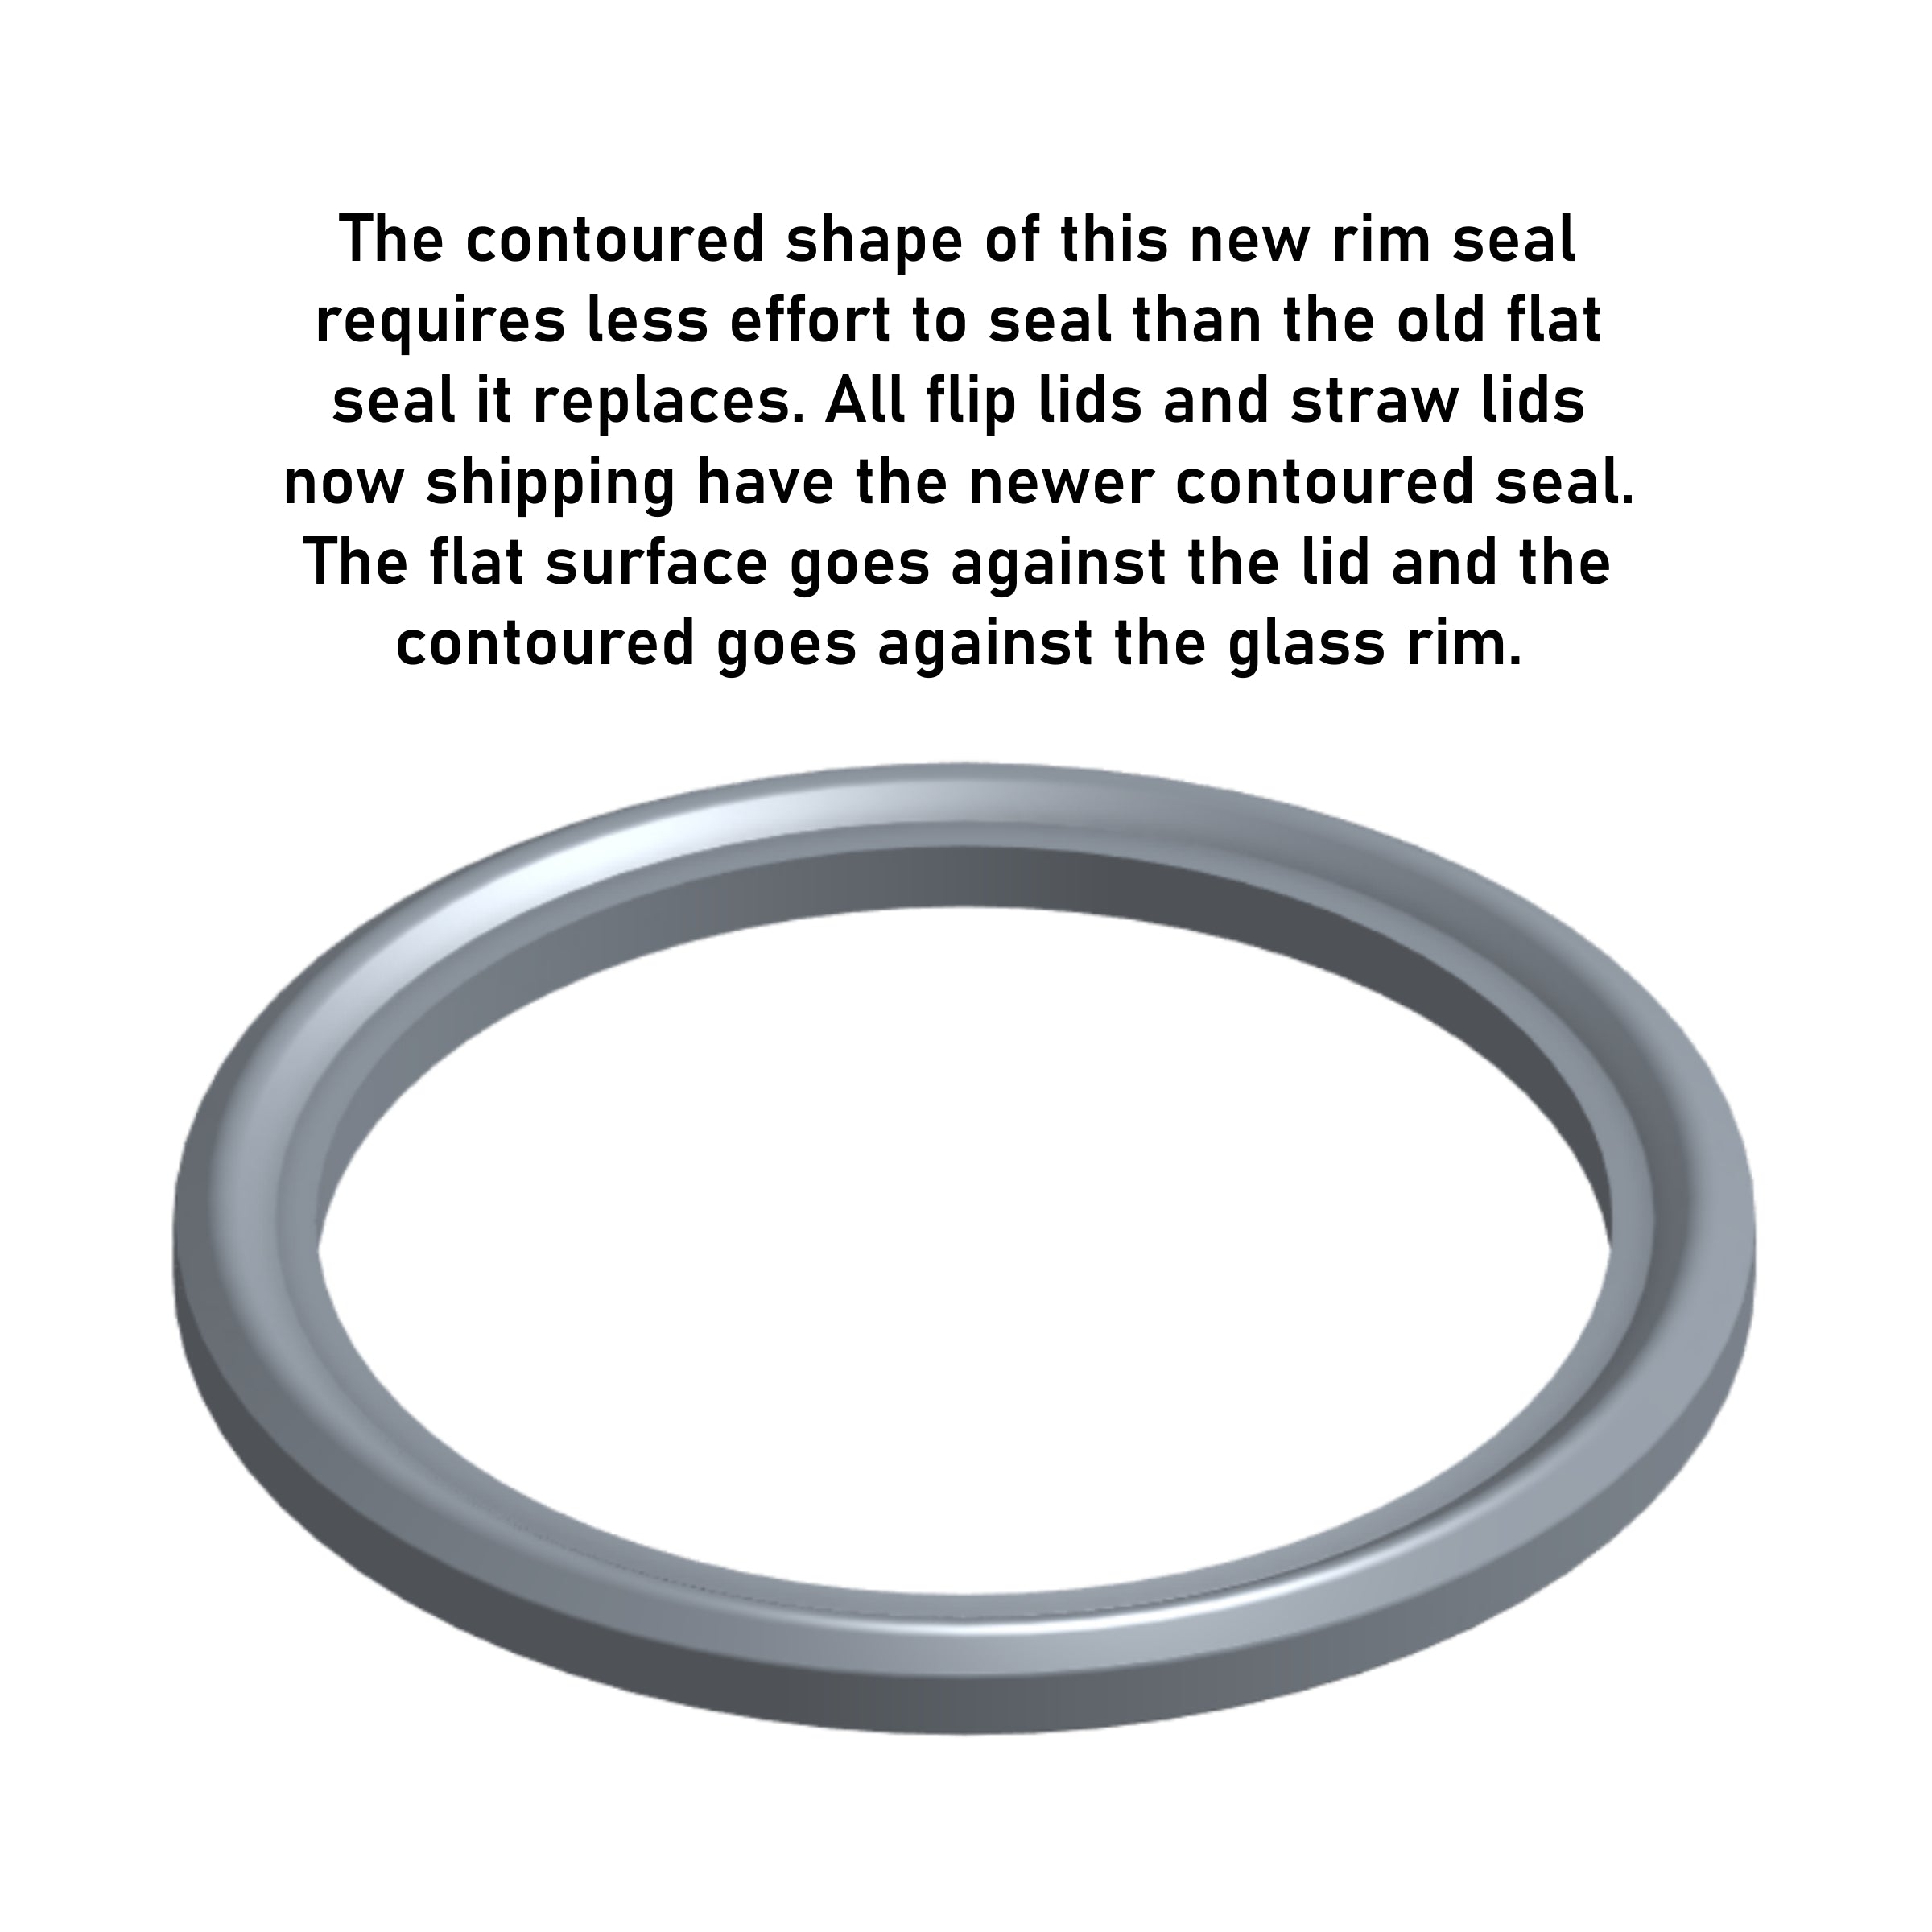 New countoured shape seals with less effort